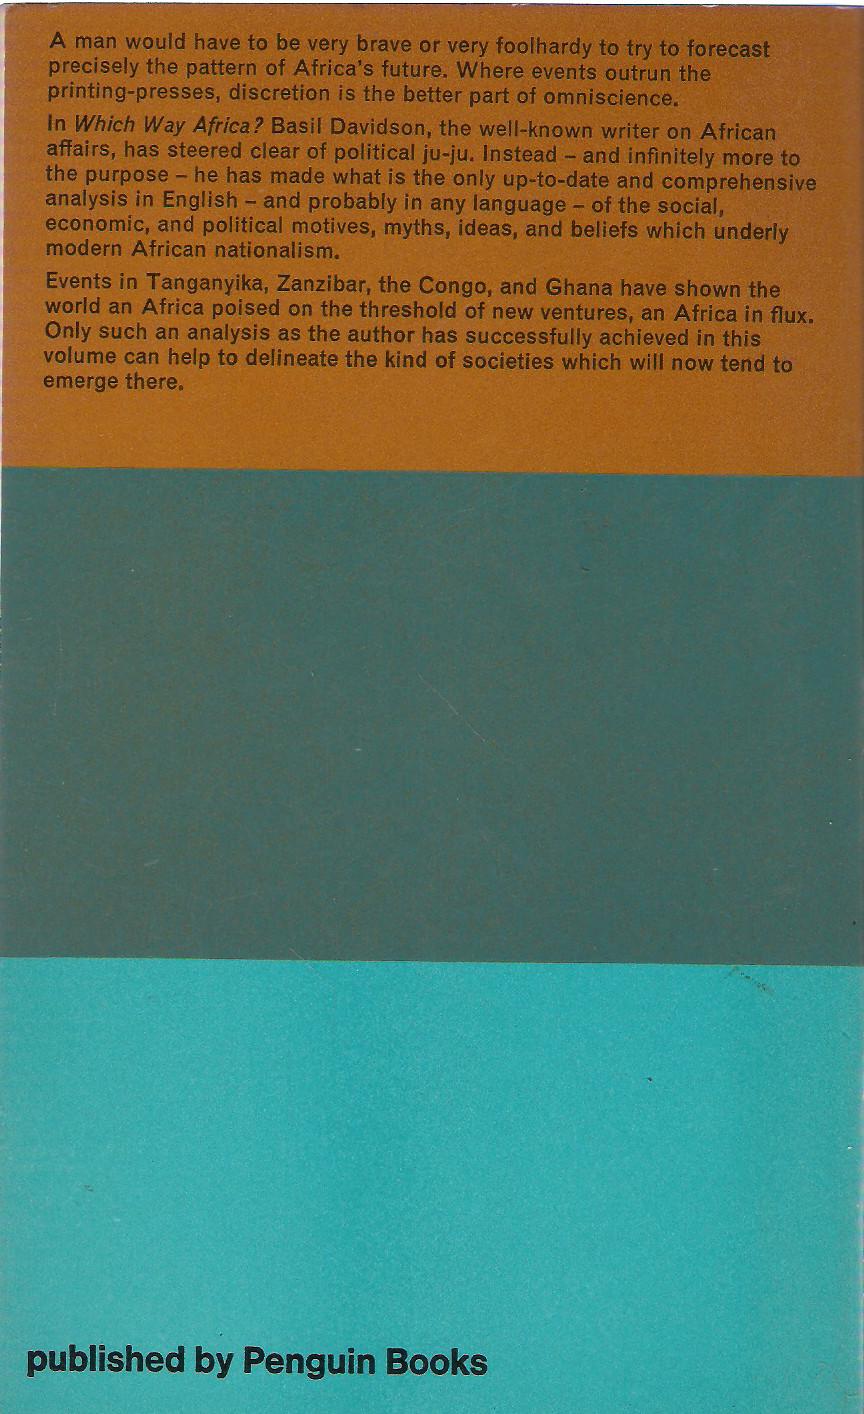 Which Way Africa (Penguin African Library) (back cover)